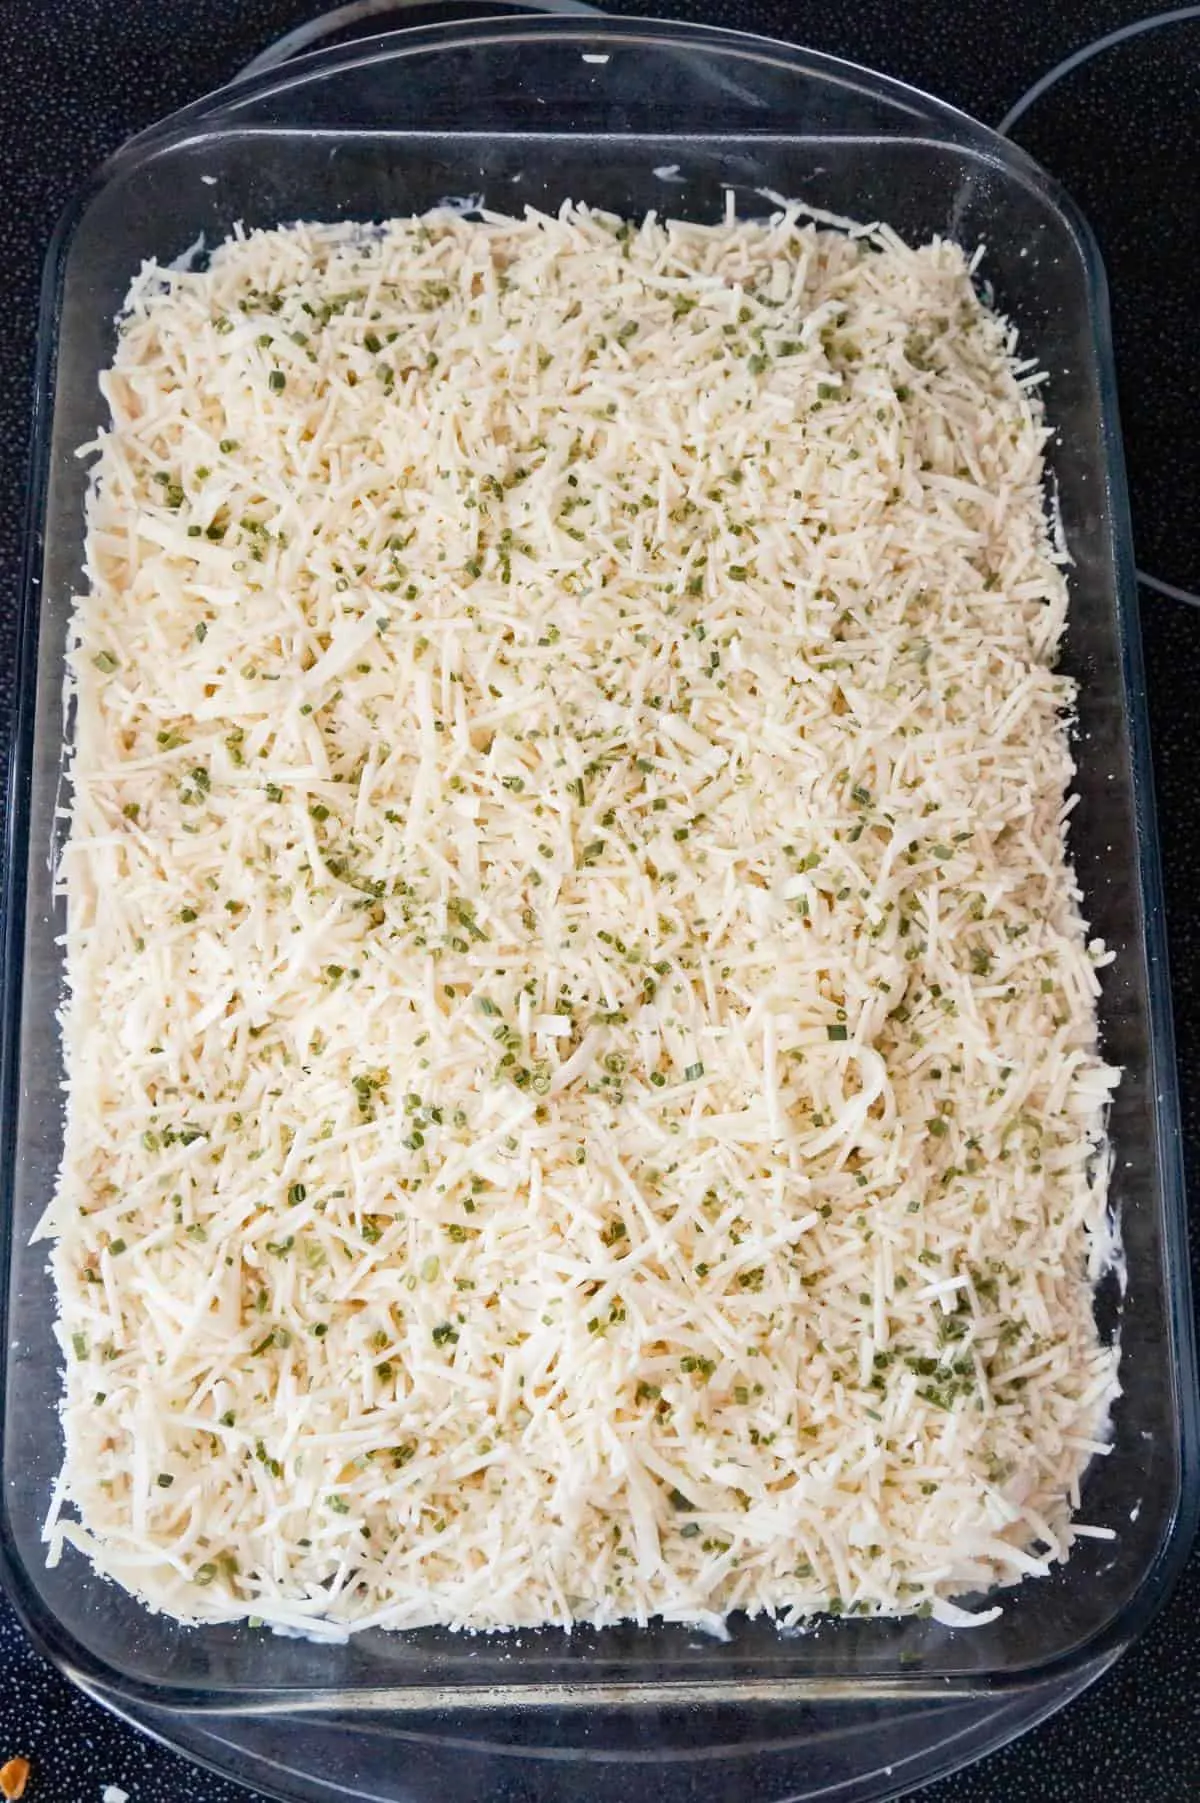 chopped chives, shredded Parmesan and shredded Mozzarella on top of chicken spaghetti before baking